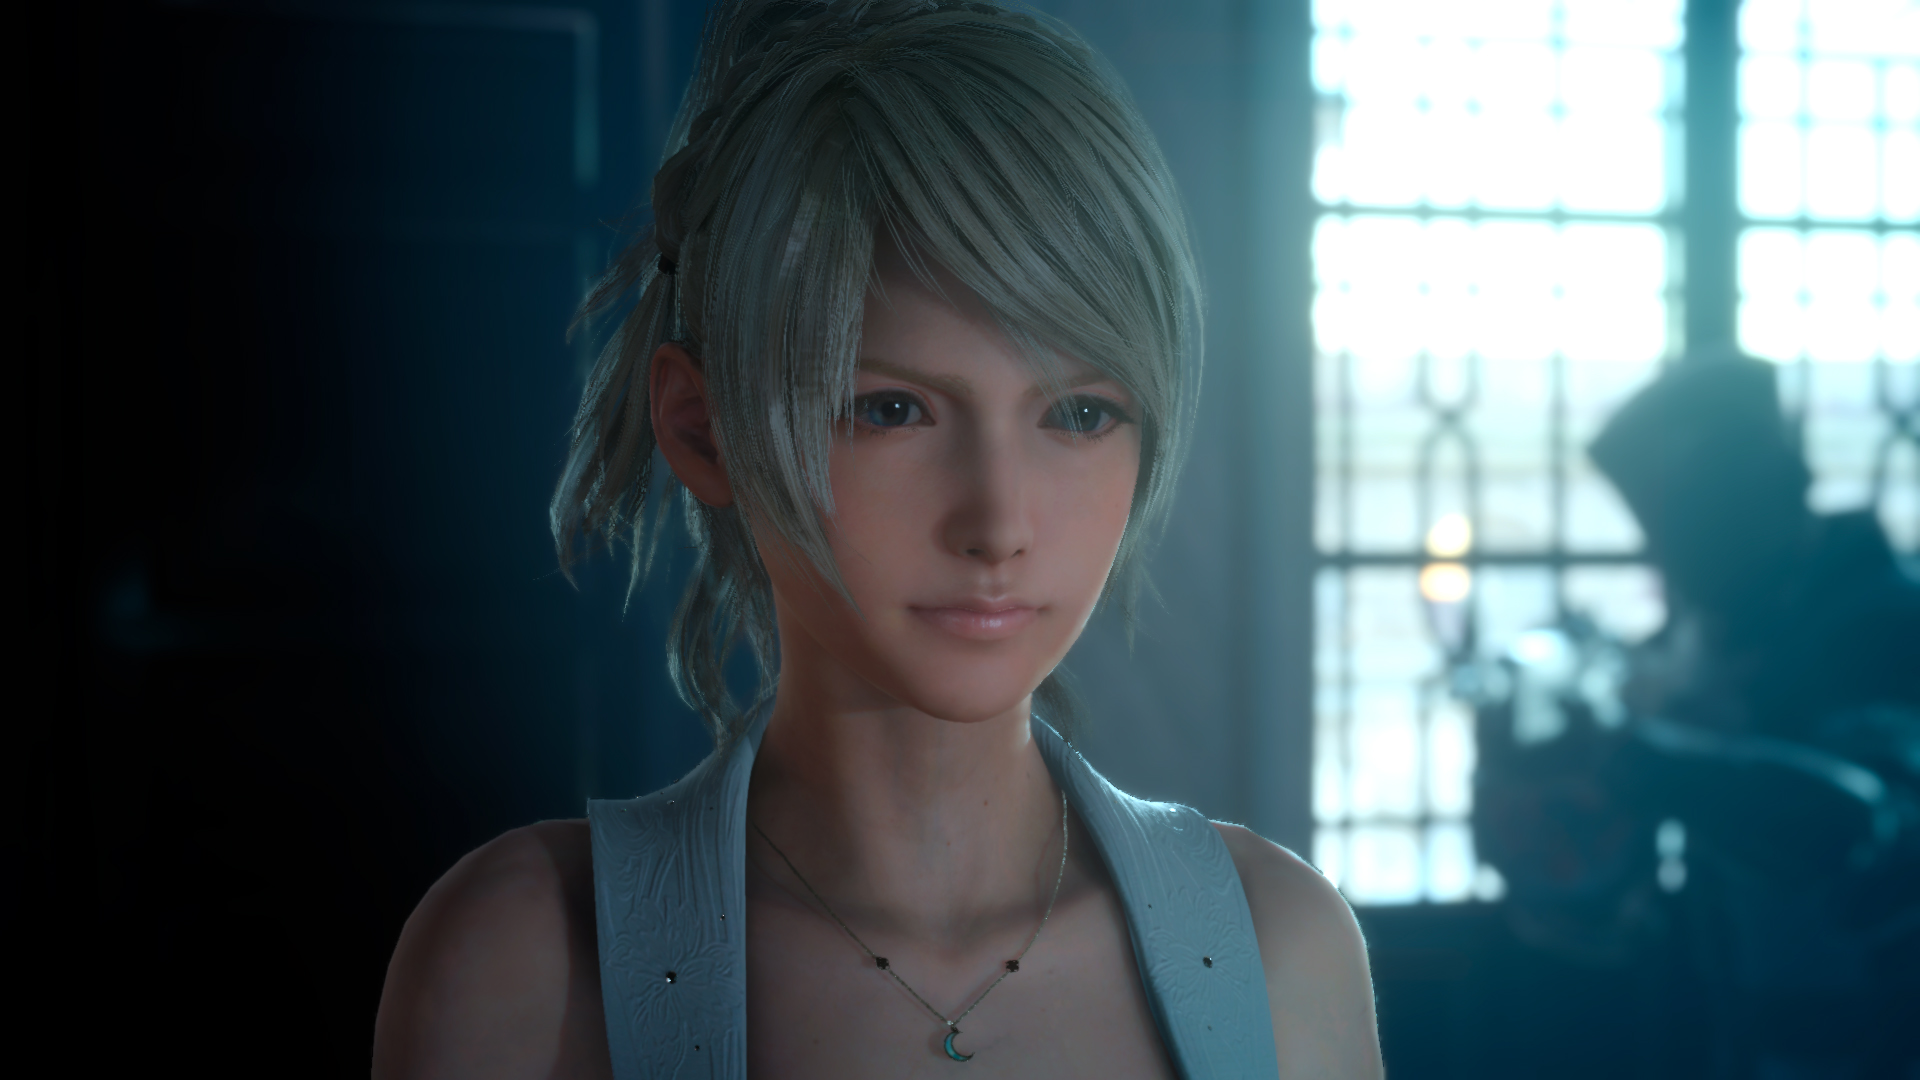 Media asset in full size related to 3dfxzone.it news item entitled as follows: Square Enix pubblica un nuovo gameplay trailer di Final Fantasy XV | Image Name: news23718_Final-Fantasy-XV-Screenshot_4.jpg